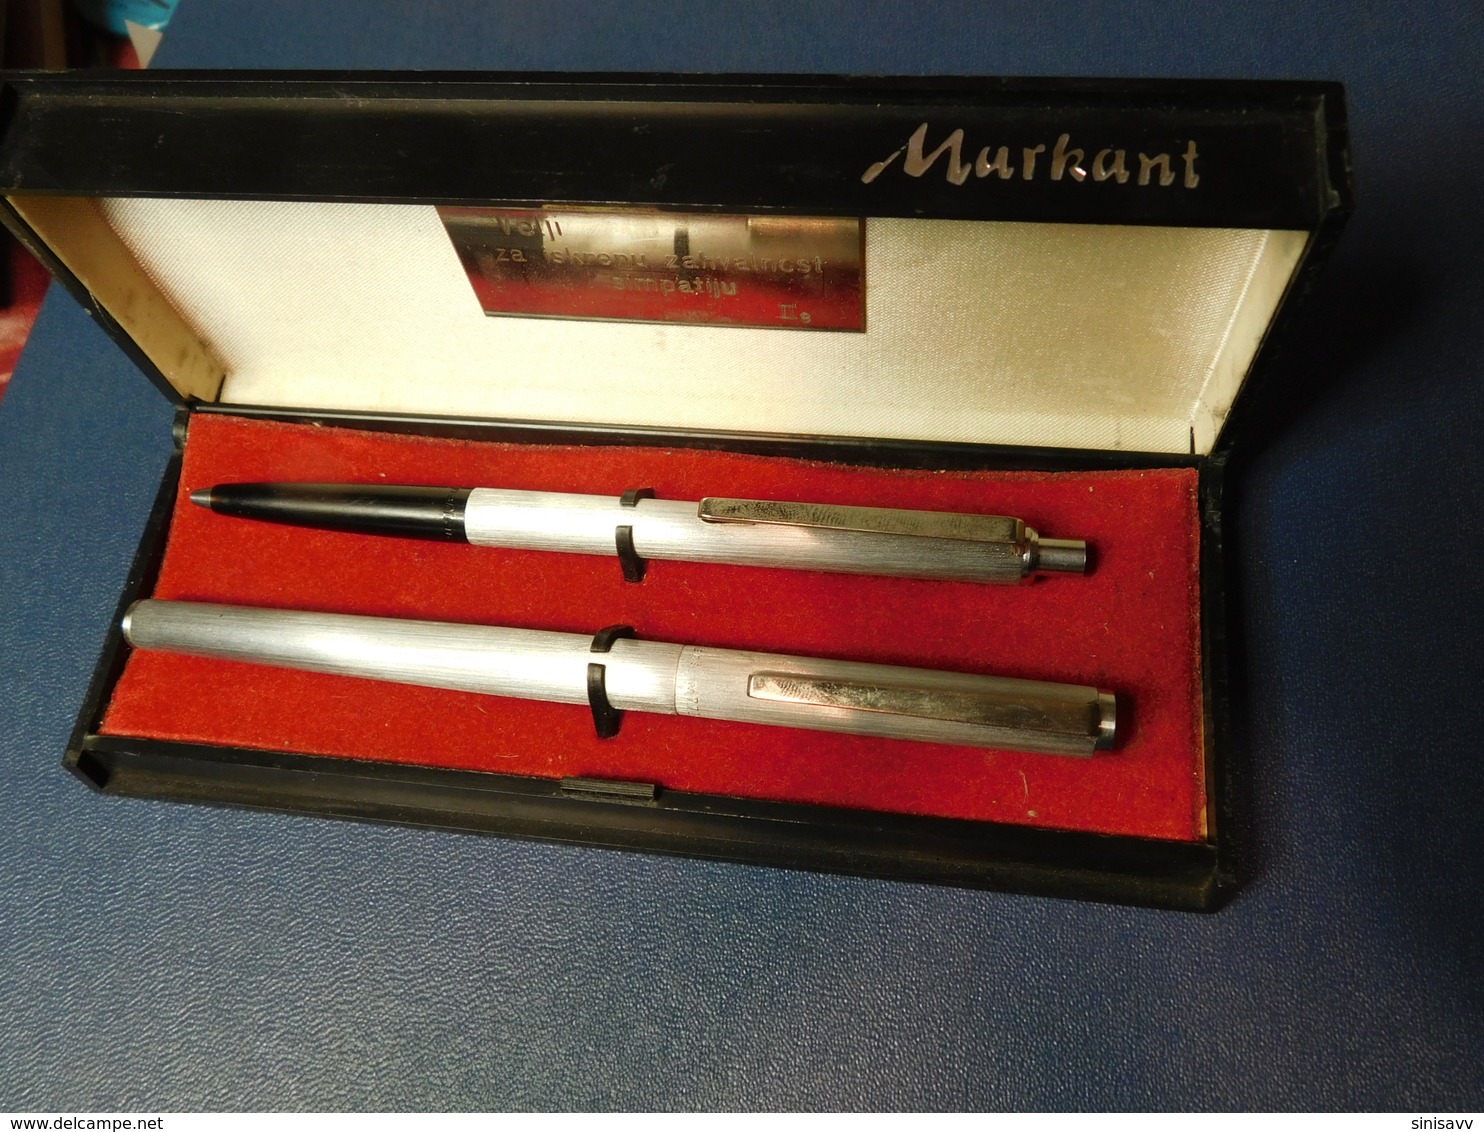 Vintage MARKANT M7720 Silver Fountain & K7720 Ballpoint Pen With Box DDR 1970s